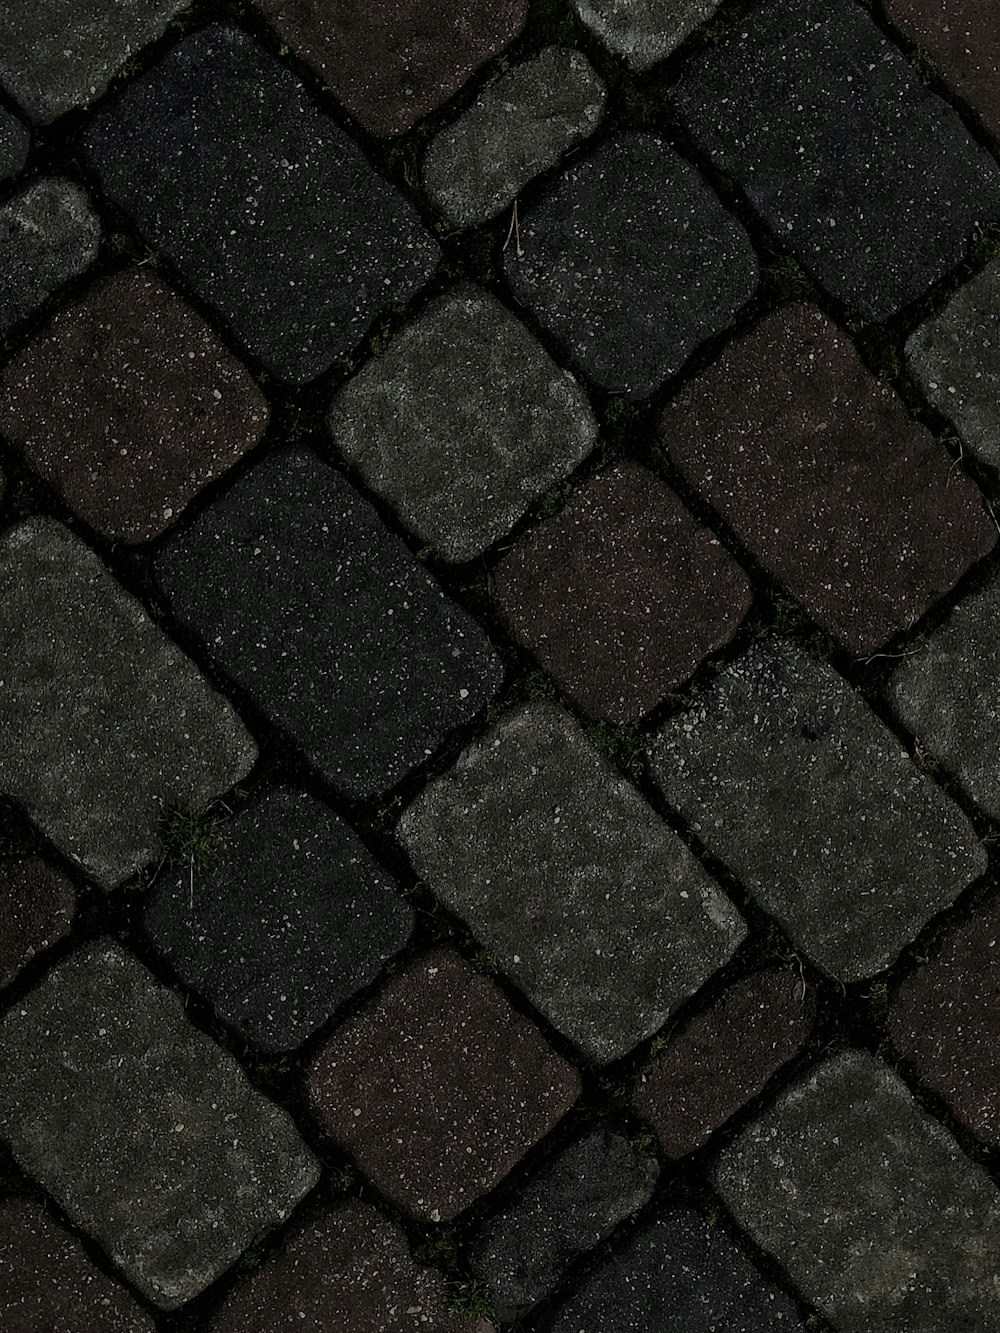 a close up of a black and brown tiled floor